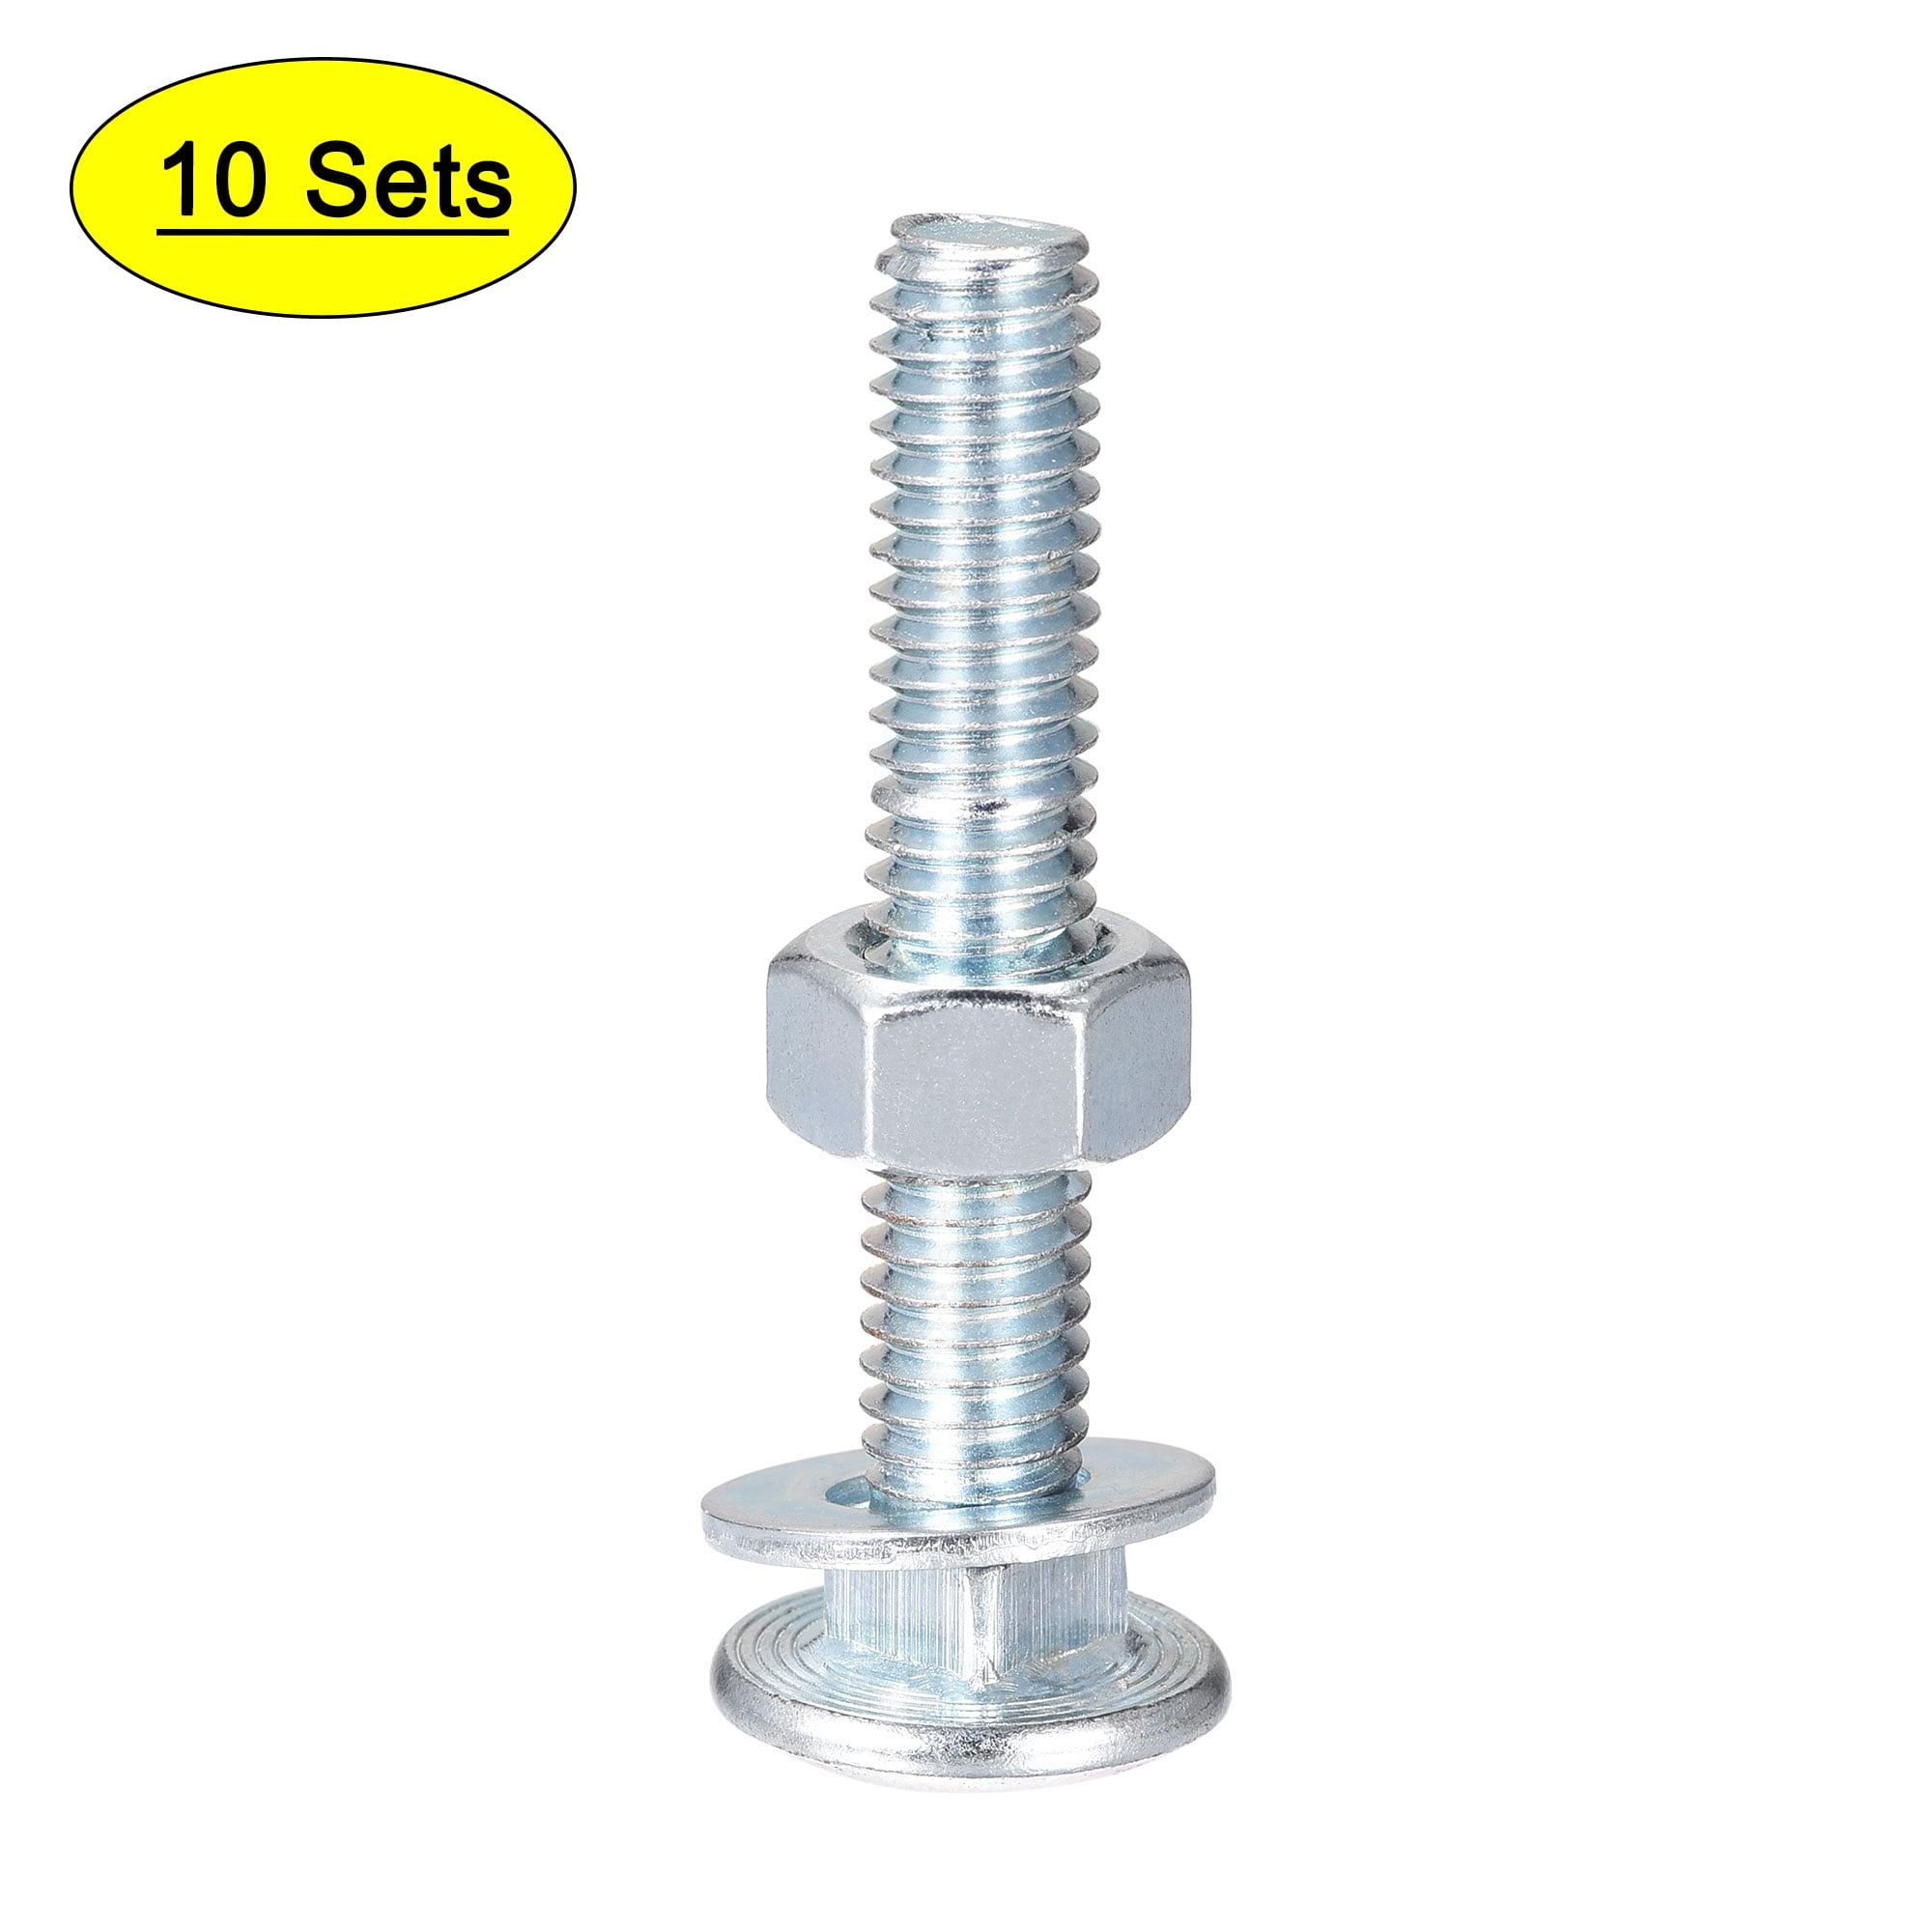 Pack of 5 x M8 x 25mm ZINC Cup Square Carriage Bolt Coach Screws with HEX Full Nuts